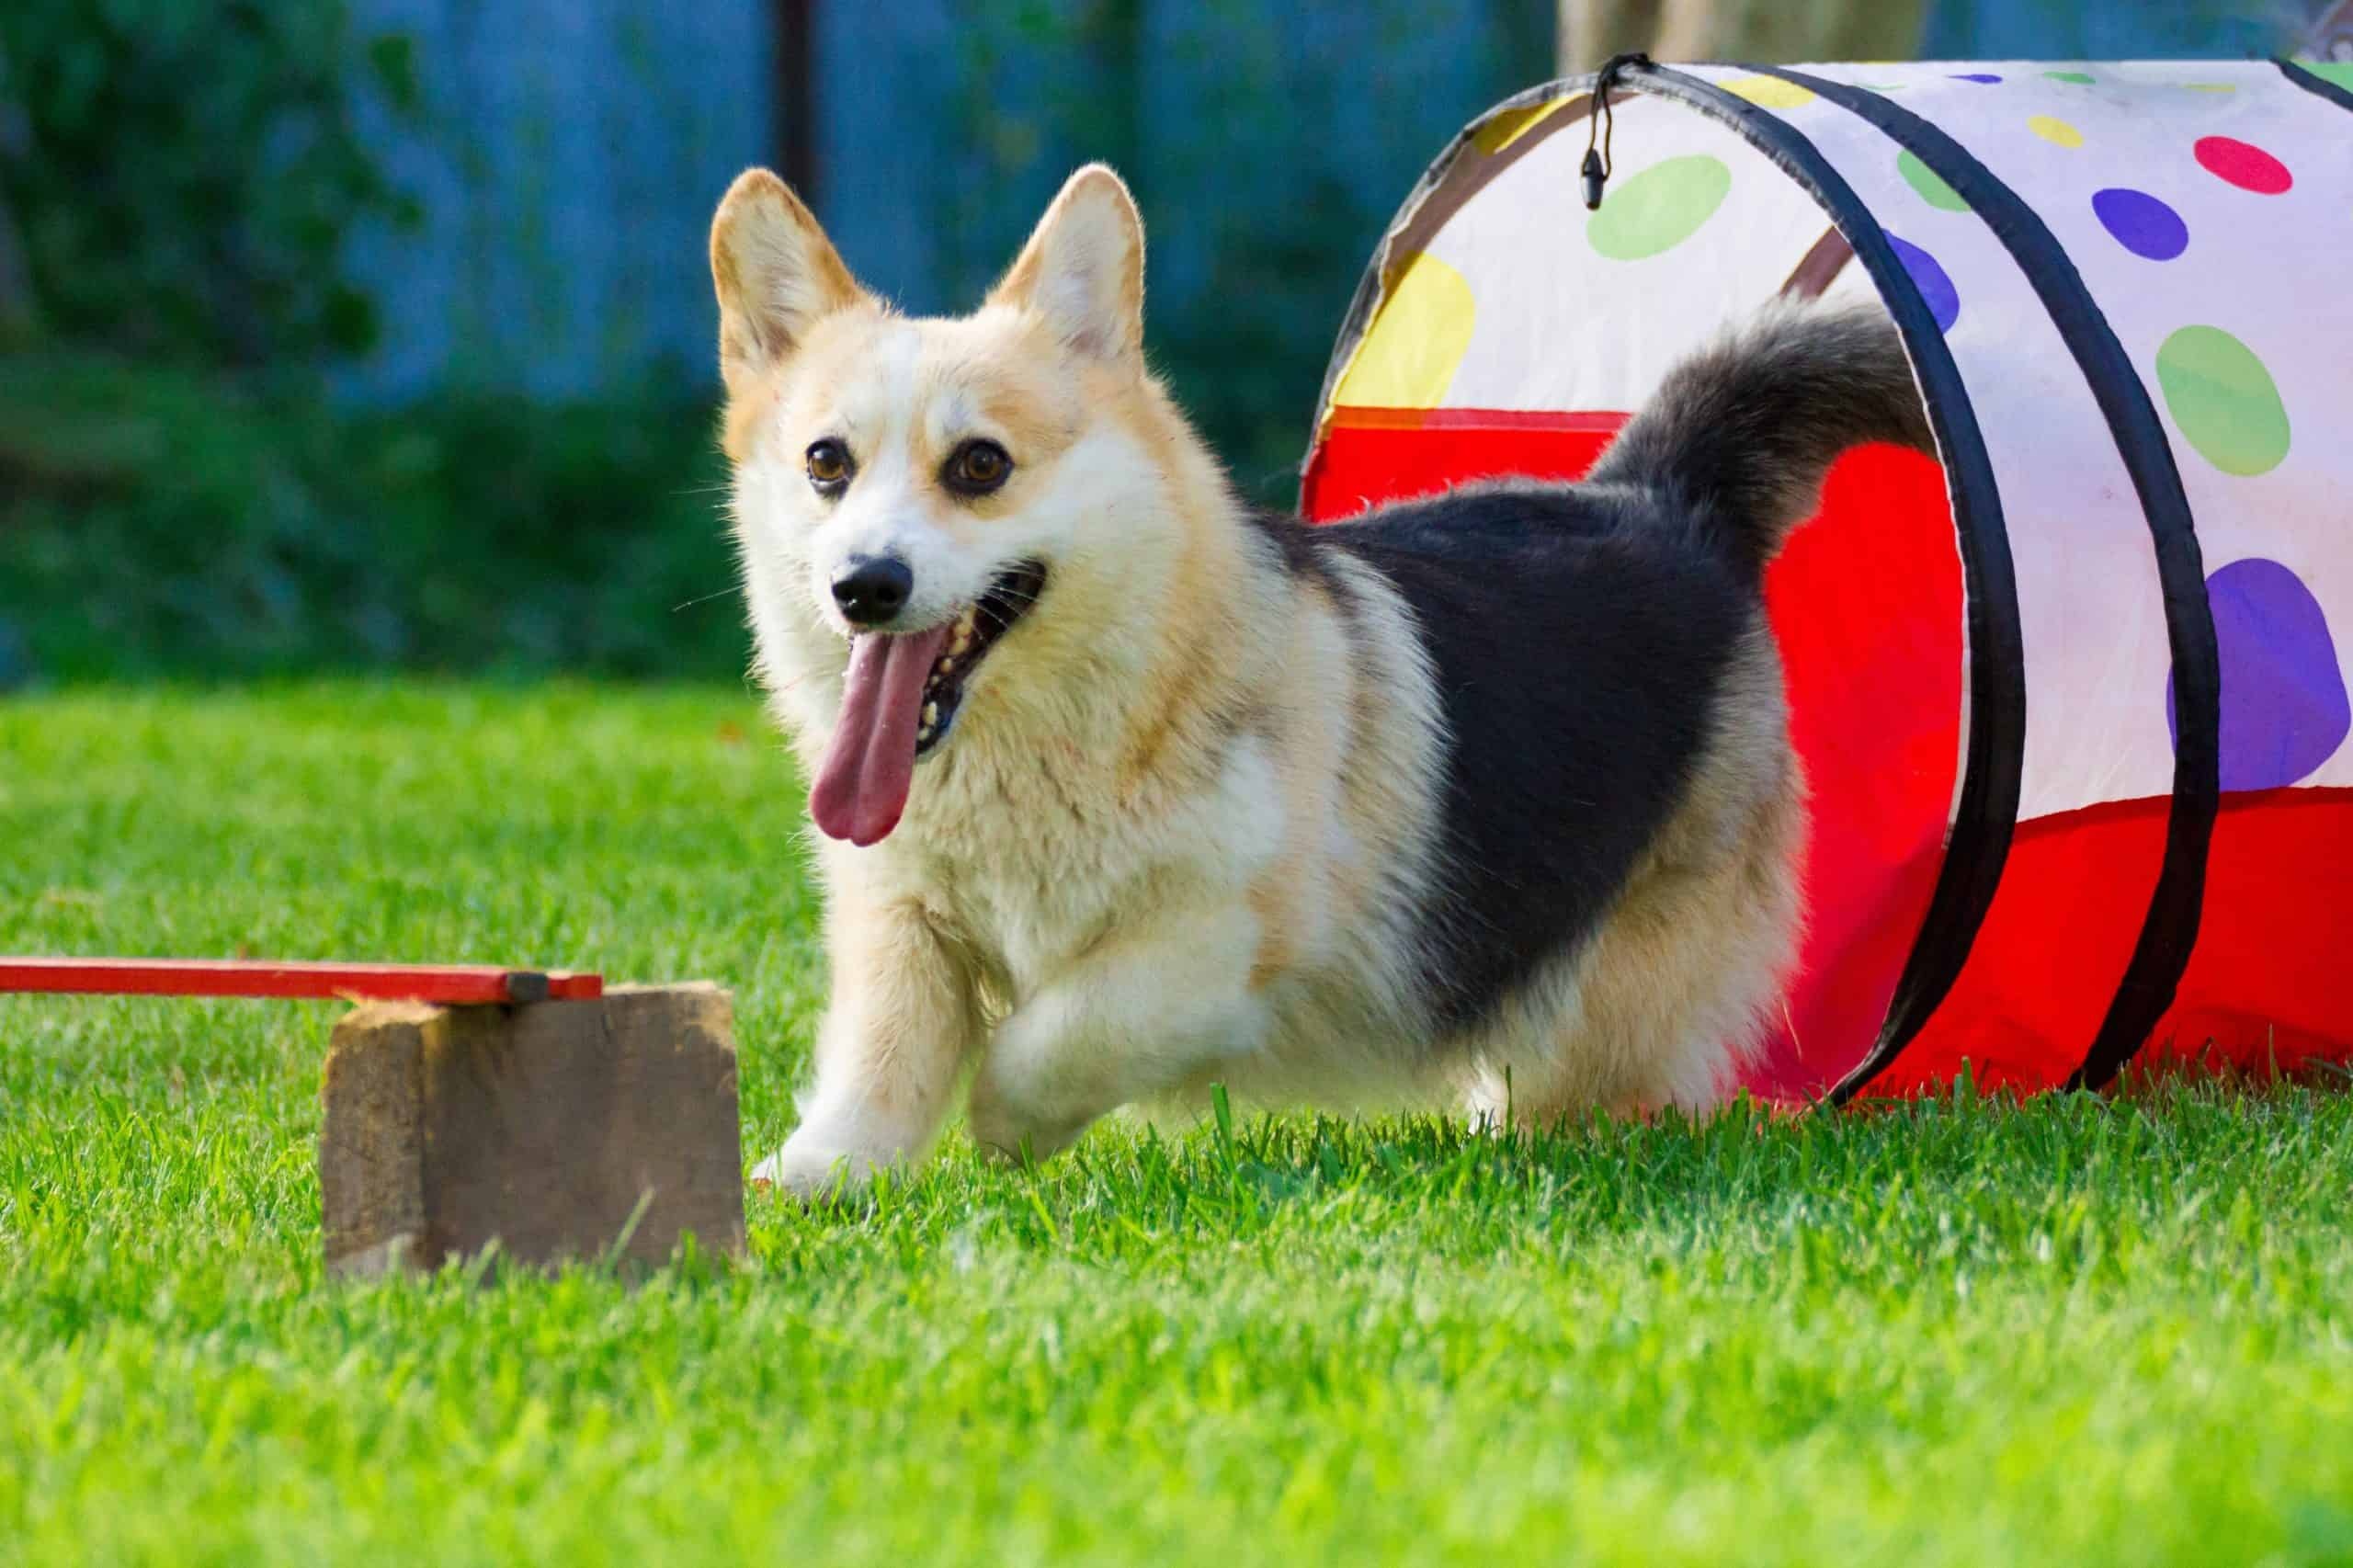 Dog Sports: Training Challenges, Pets Agility Courses, Pro Exercises. 2560x1710 HD Wallpaper.